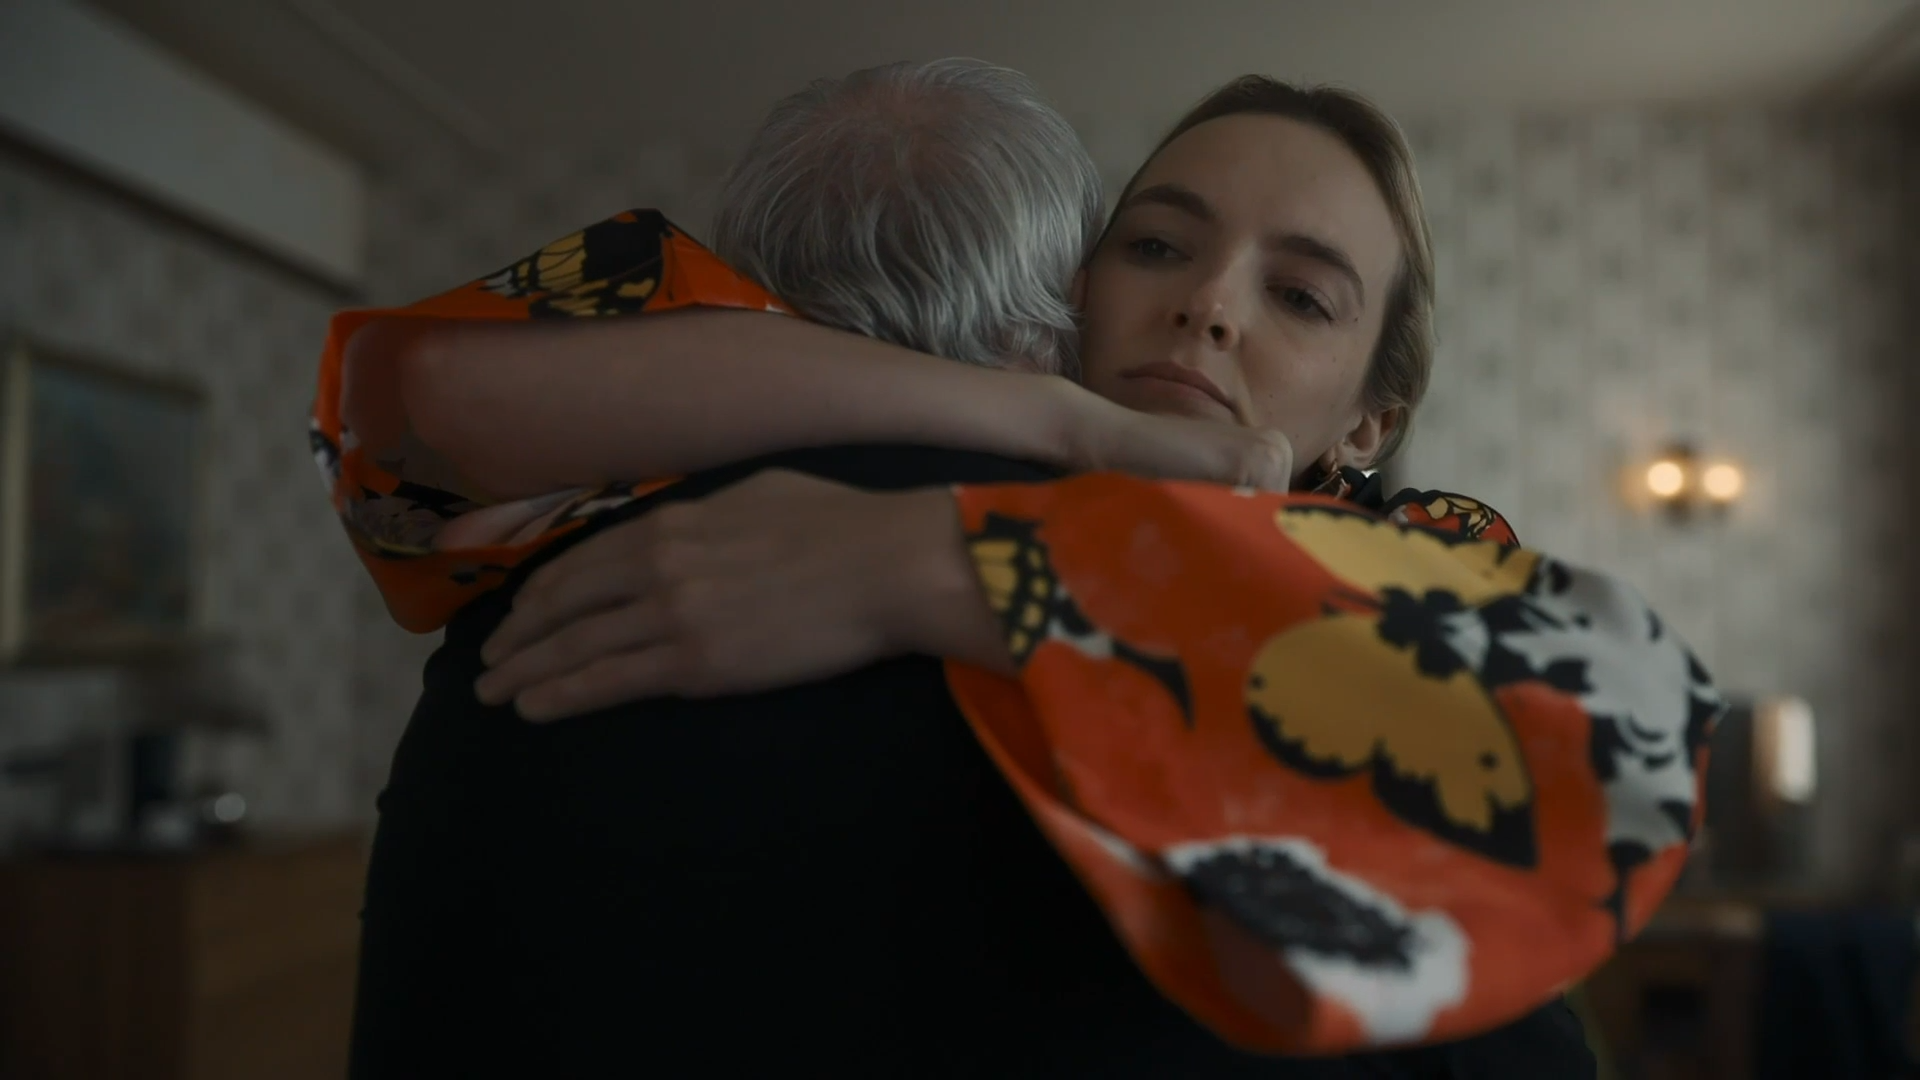 Watch 'Killing Eve' Must-See Moment: Villanelle Confronts Konstantin | Killing Eve Video Extras